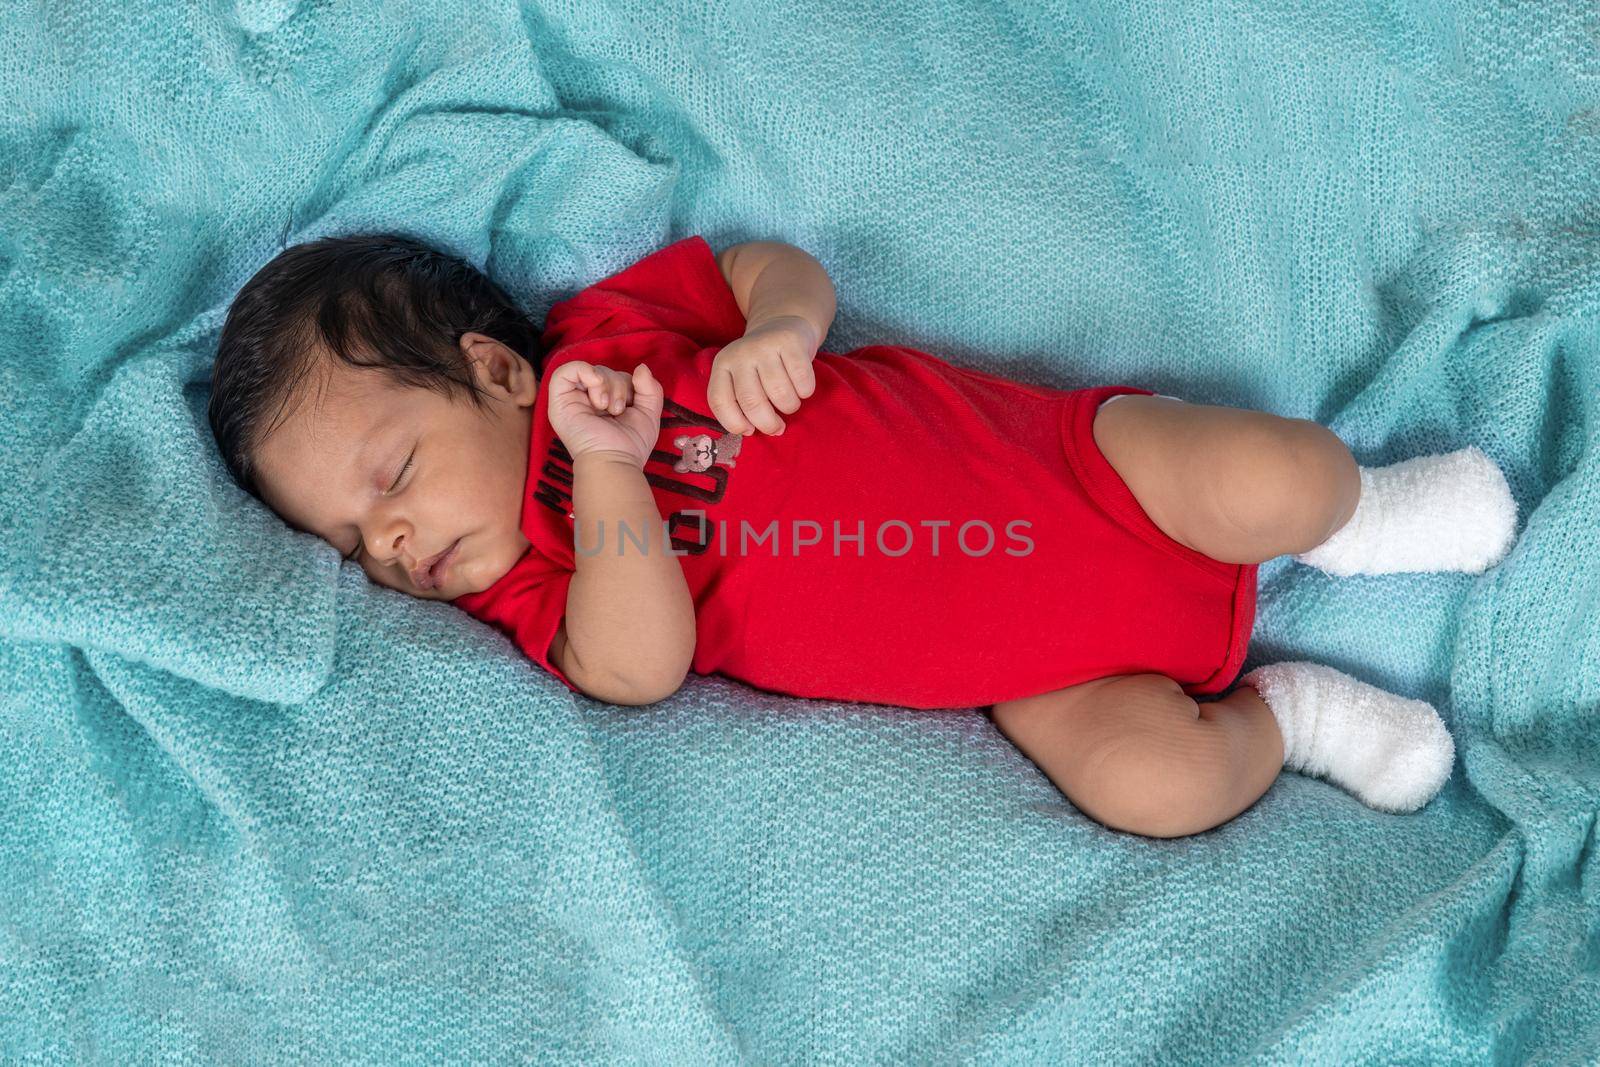 Infant asleep lying on his stomach, dressed in red clothes